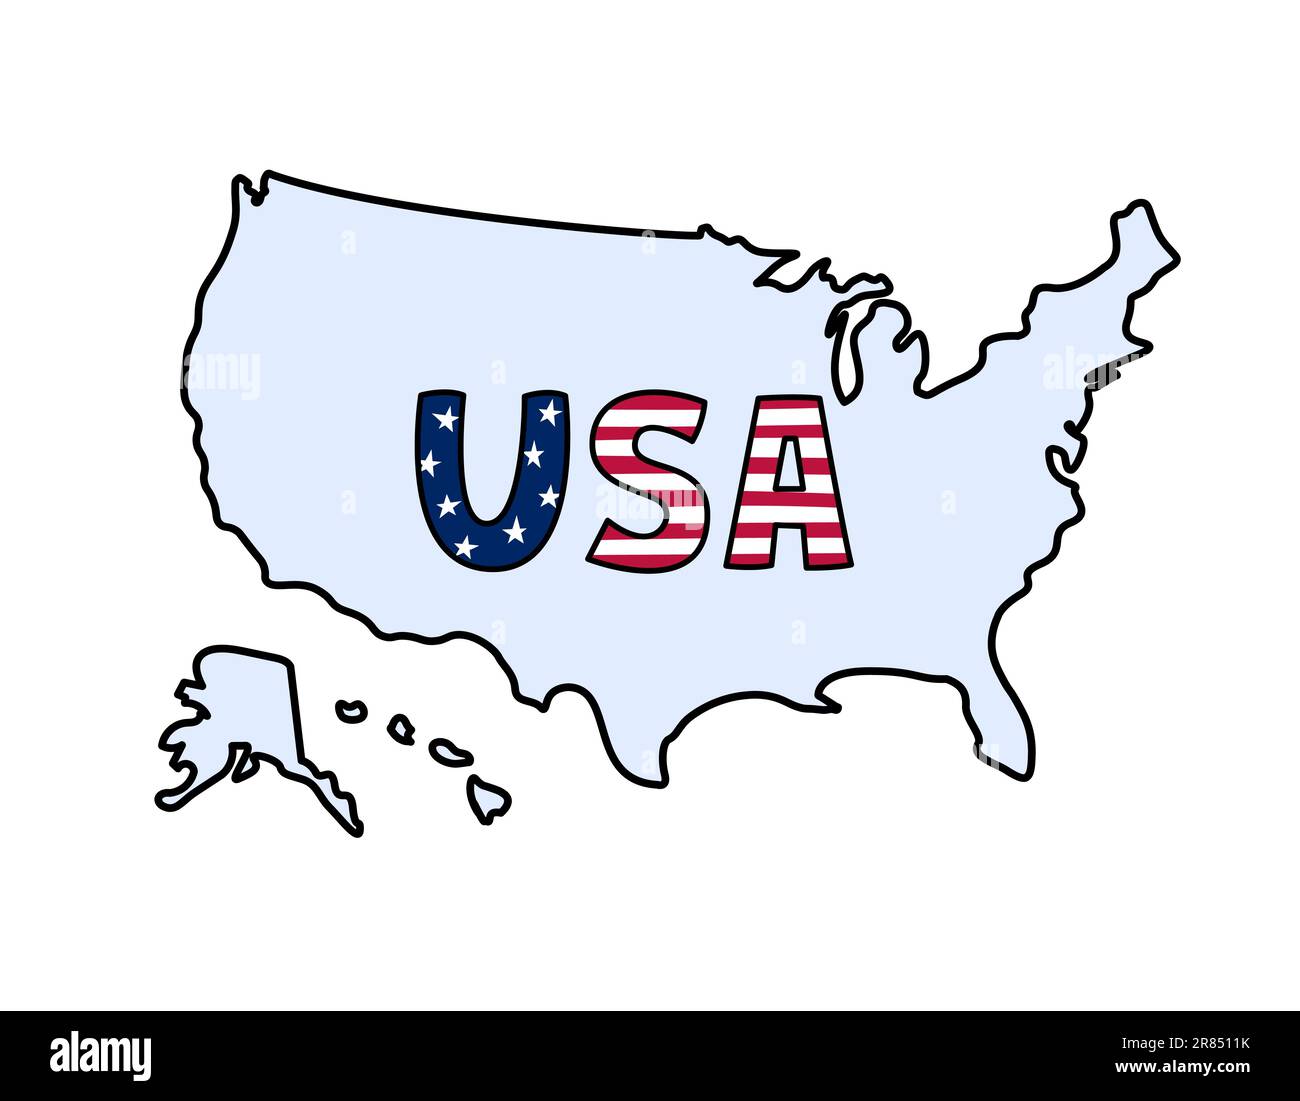 USA map contours doodle. Vector illustration. United States of America country. Hand drawn georpaphic borders with Alaska and Hawaii, text USA Stock Vector